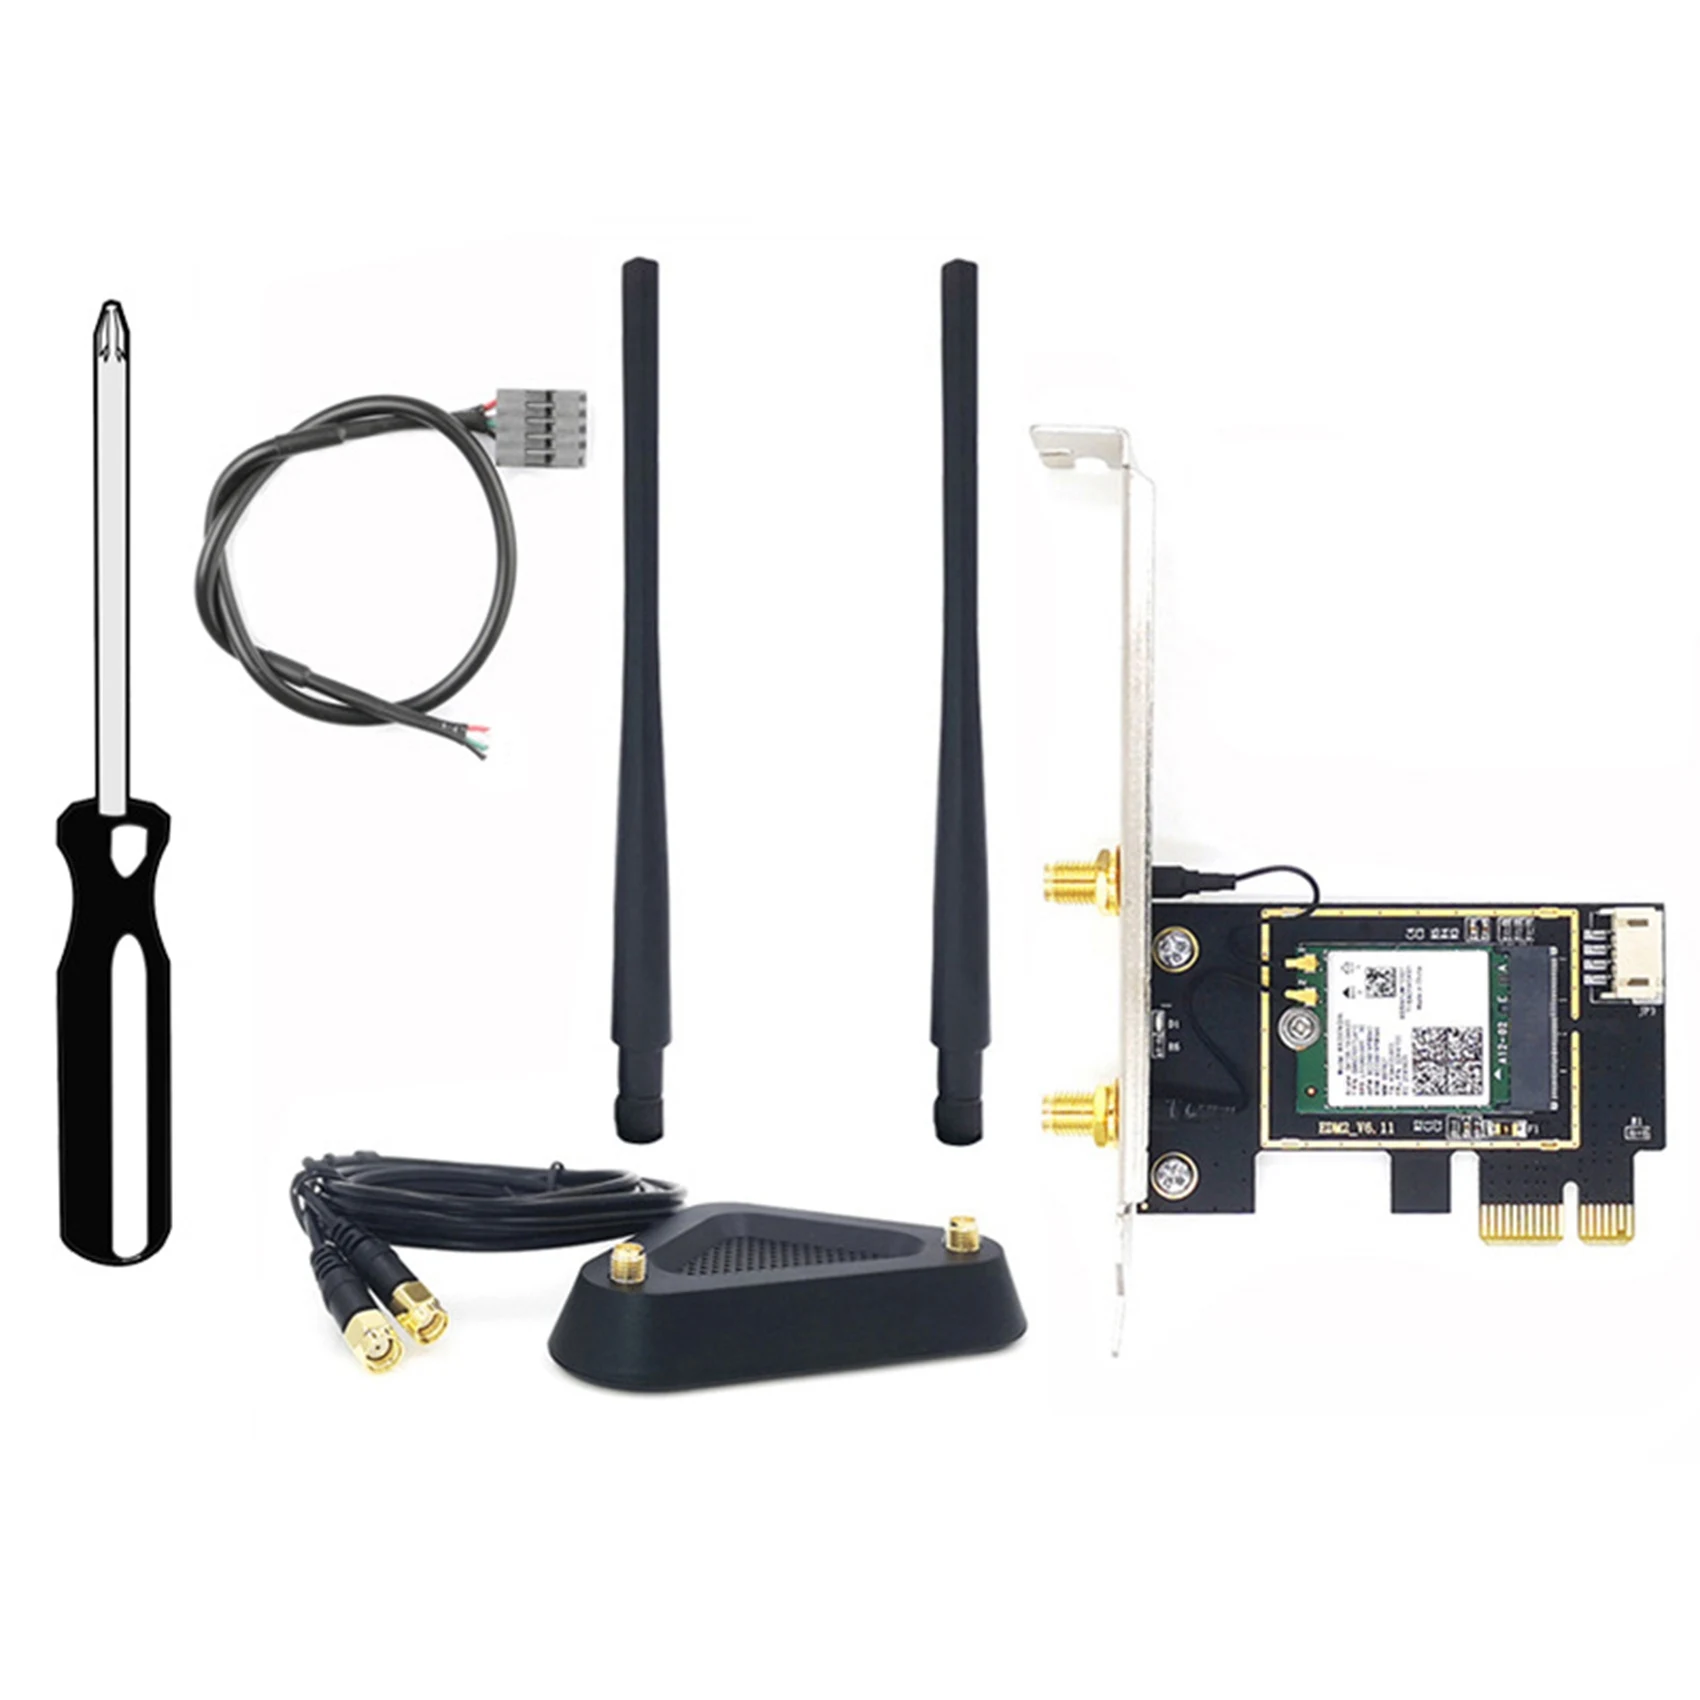 

AX210 WiFi6E Desktop Built-in PCIE Wireless Network Card with Removable 8DB Extension Cable Antenna Bluetooth